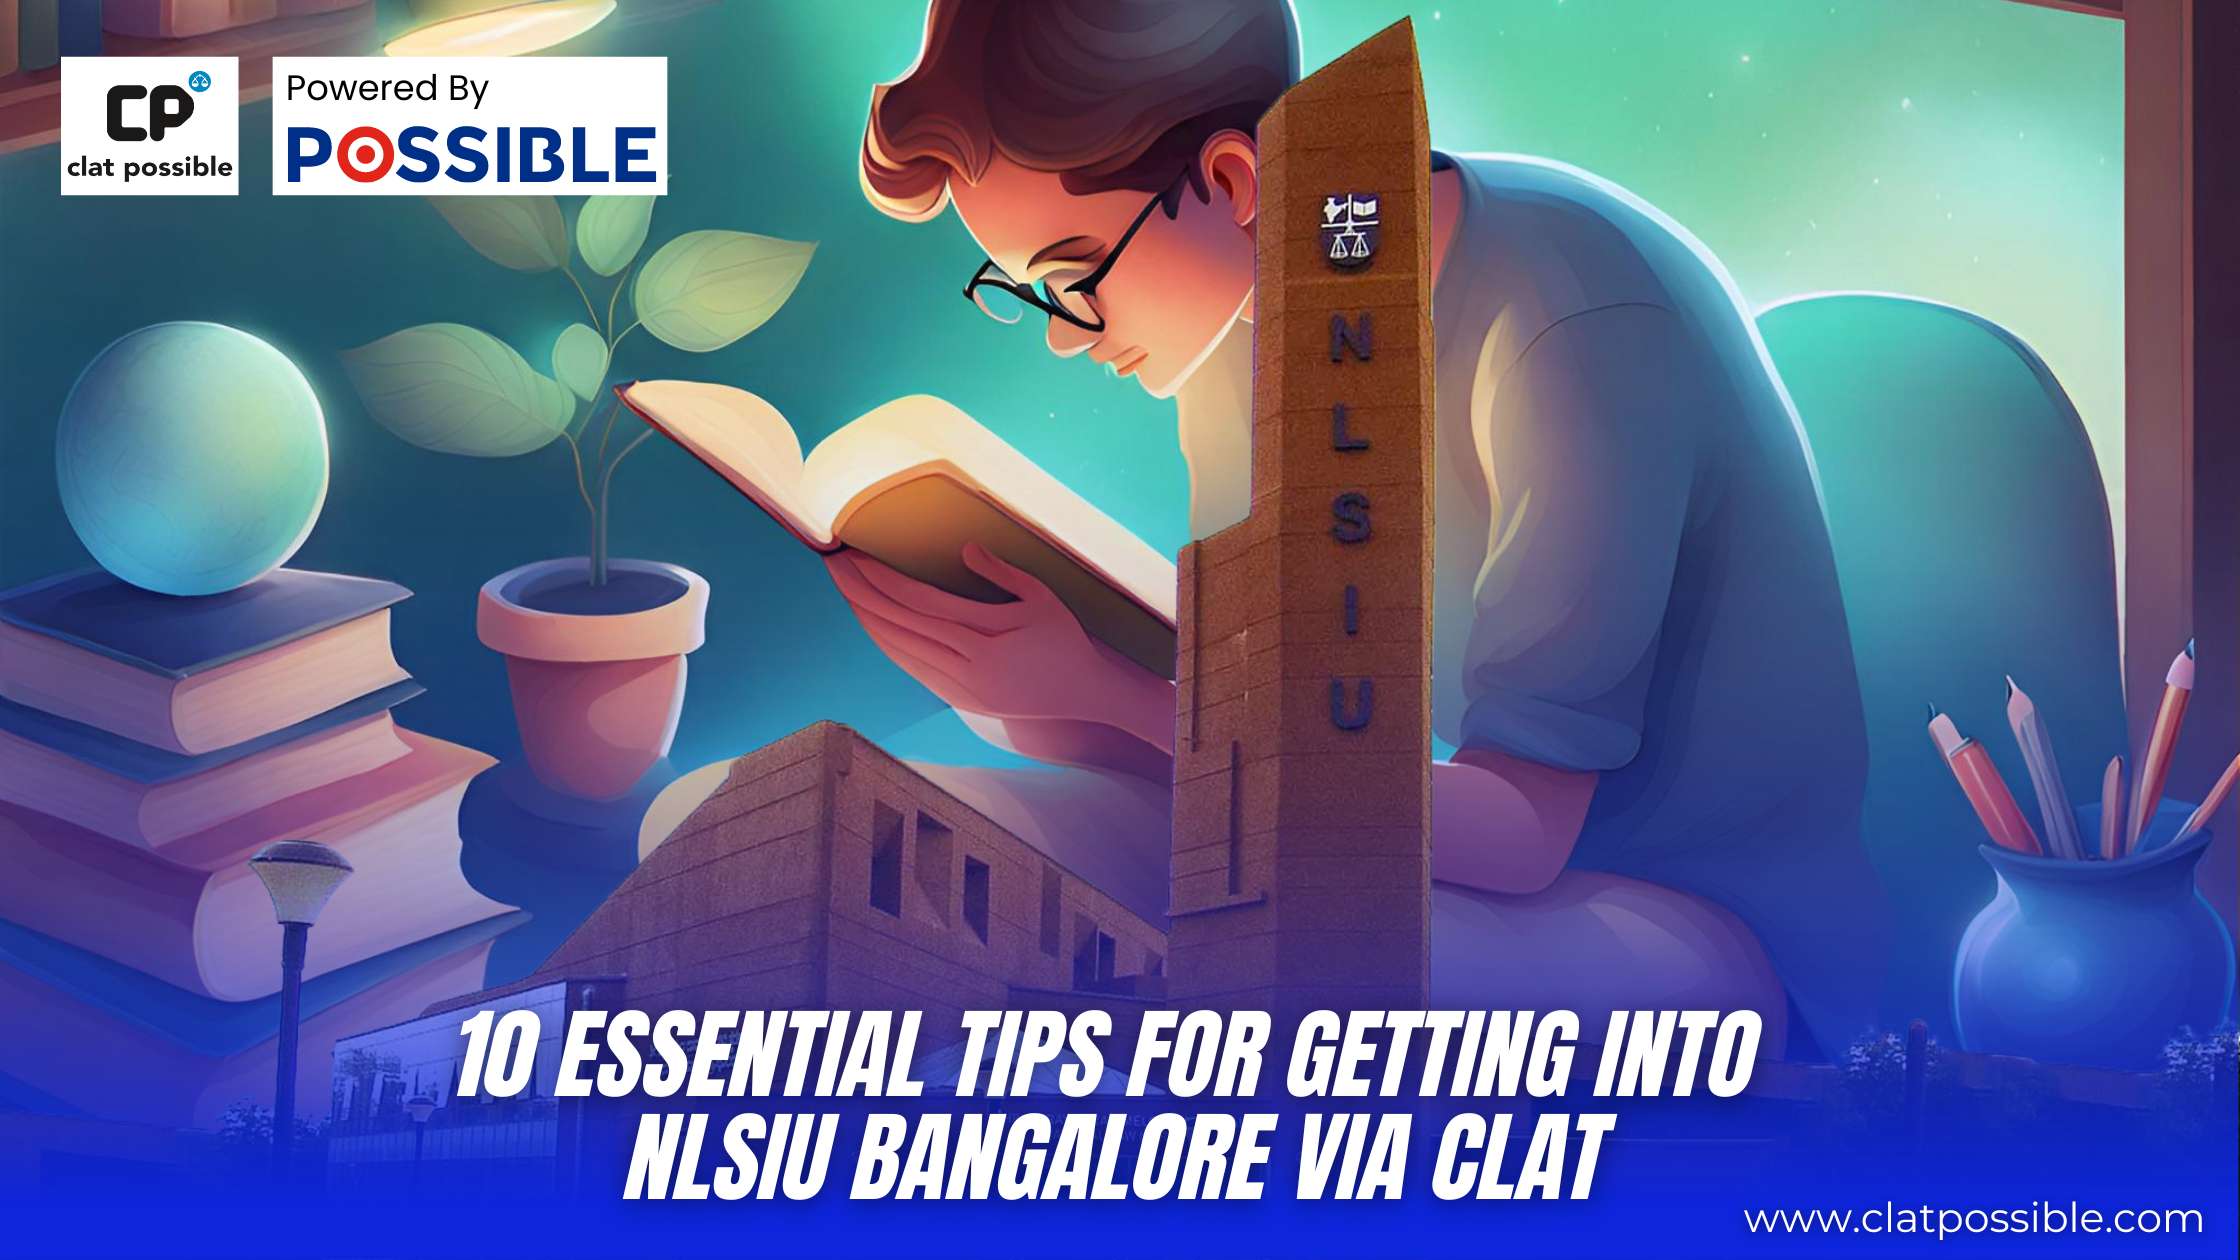 10 Tips for Getting into NLSIU Bangalore